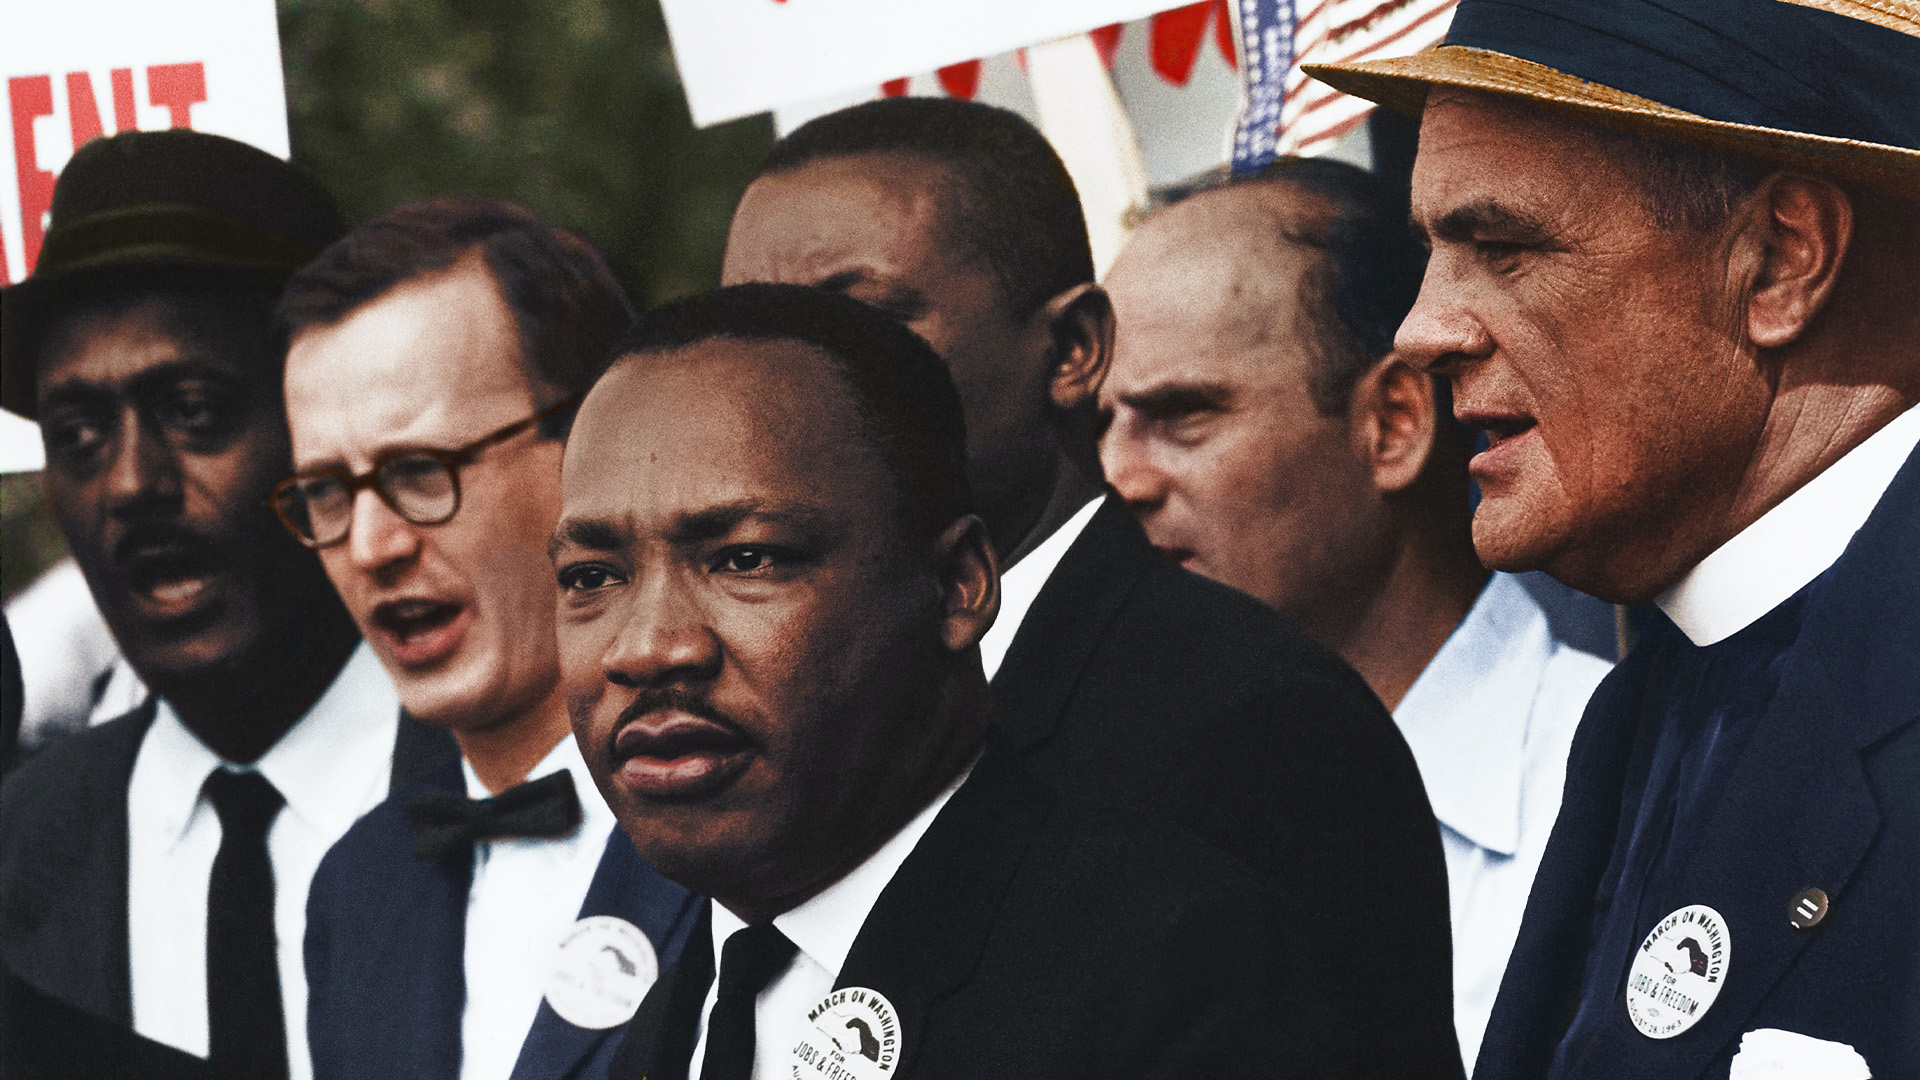 A photo of Martin Luther King Jr. looking out to the distance. He is surrounded by 5 other men who are standing behind him.